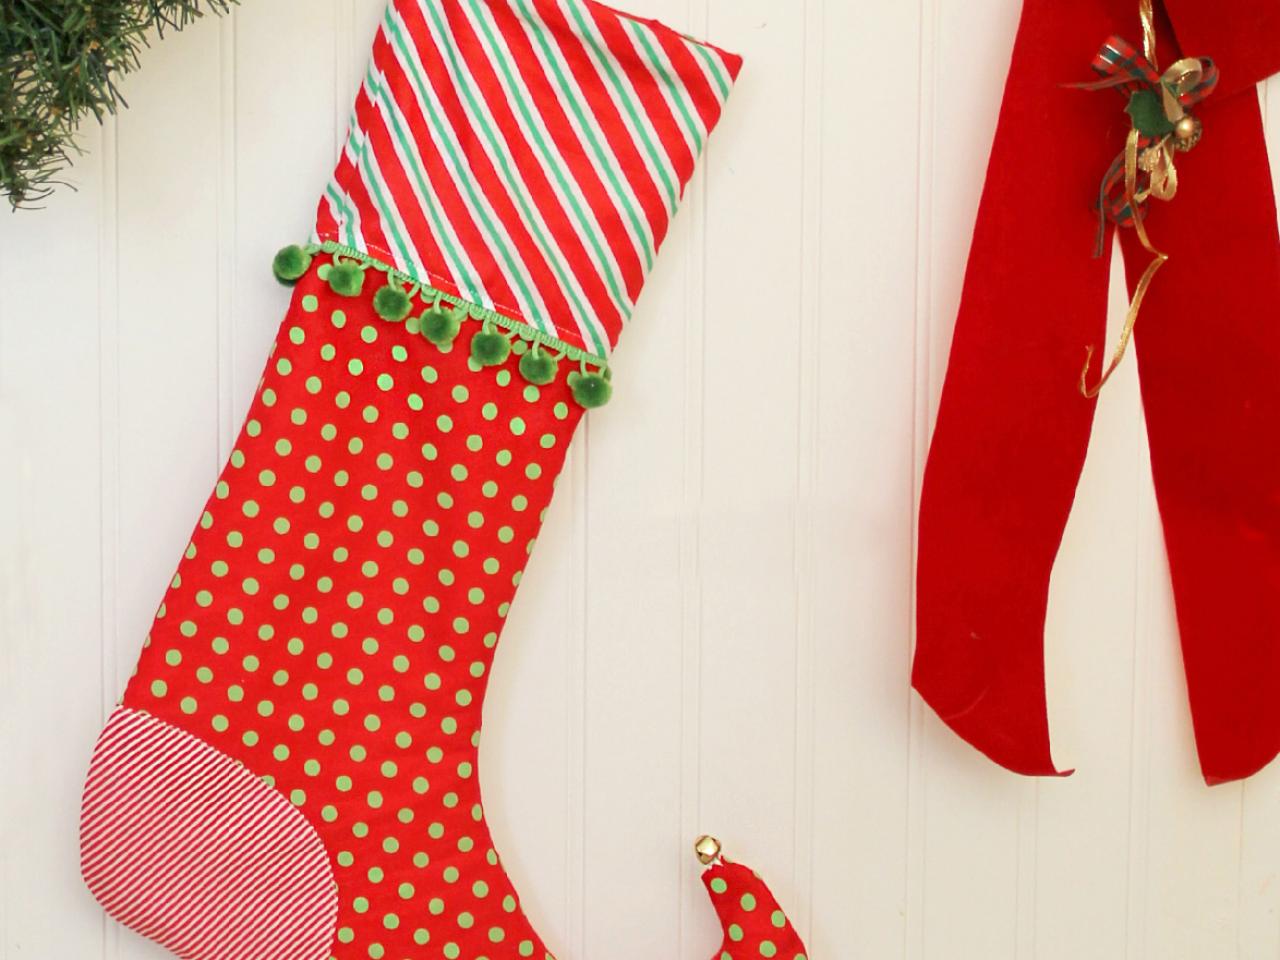 23+ Great Picture of Stocking Sewing Pattern - figswoodfiredbistro.com   Christmas stockings sewing, Christmas stocking pattern, Christmas stocking  tutorial